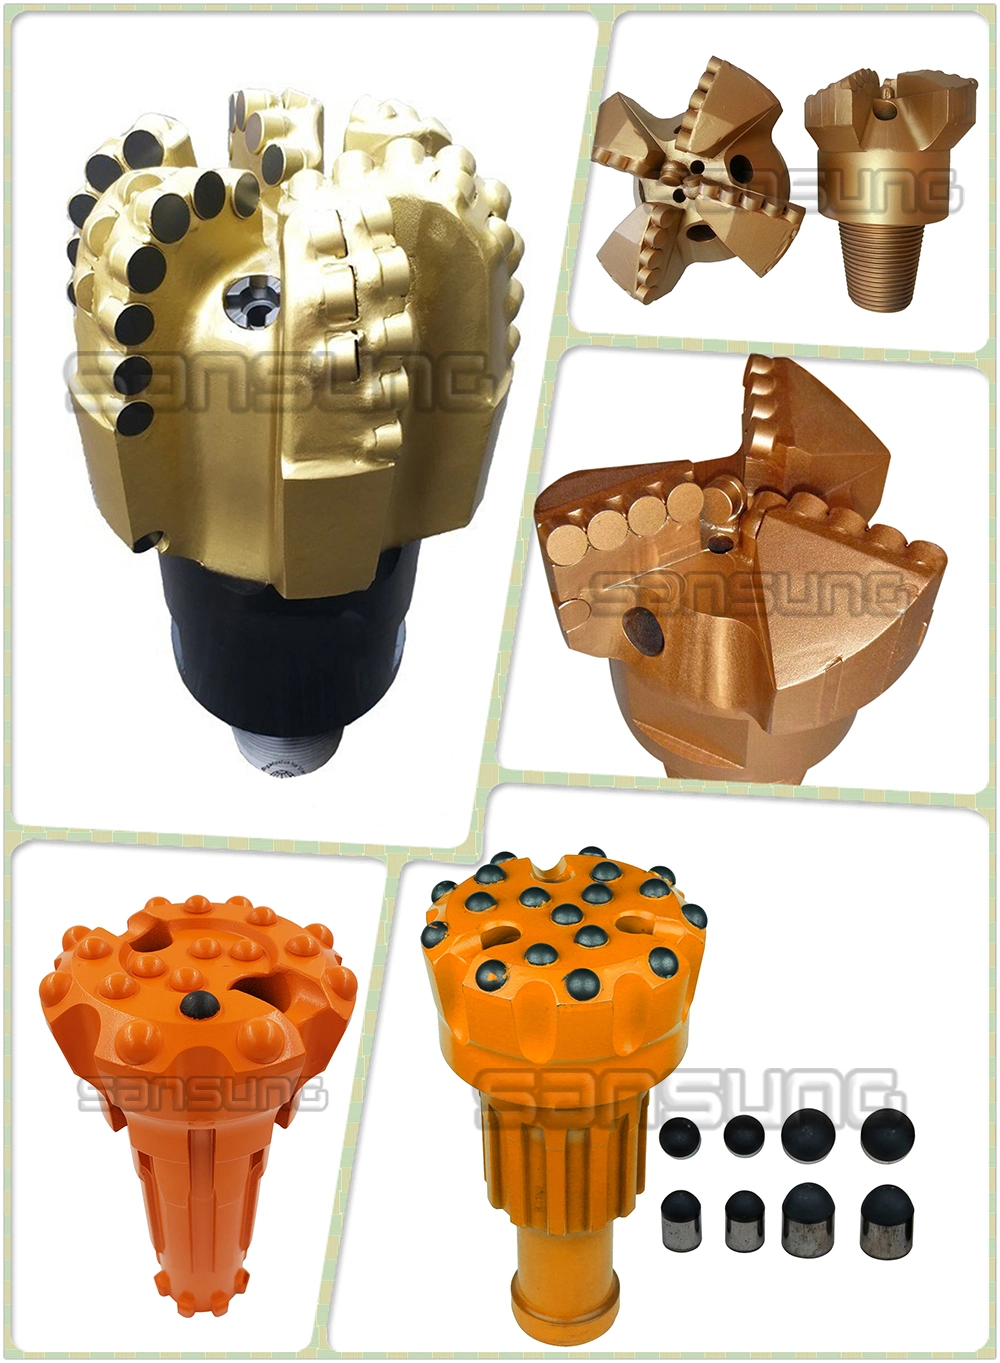 Polycrystalline Diamond Compact PDC Cutter for Drilling in Petroleum Oil Field and Mining Industries